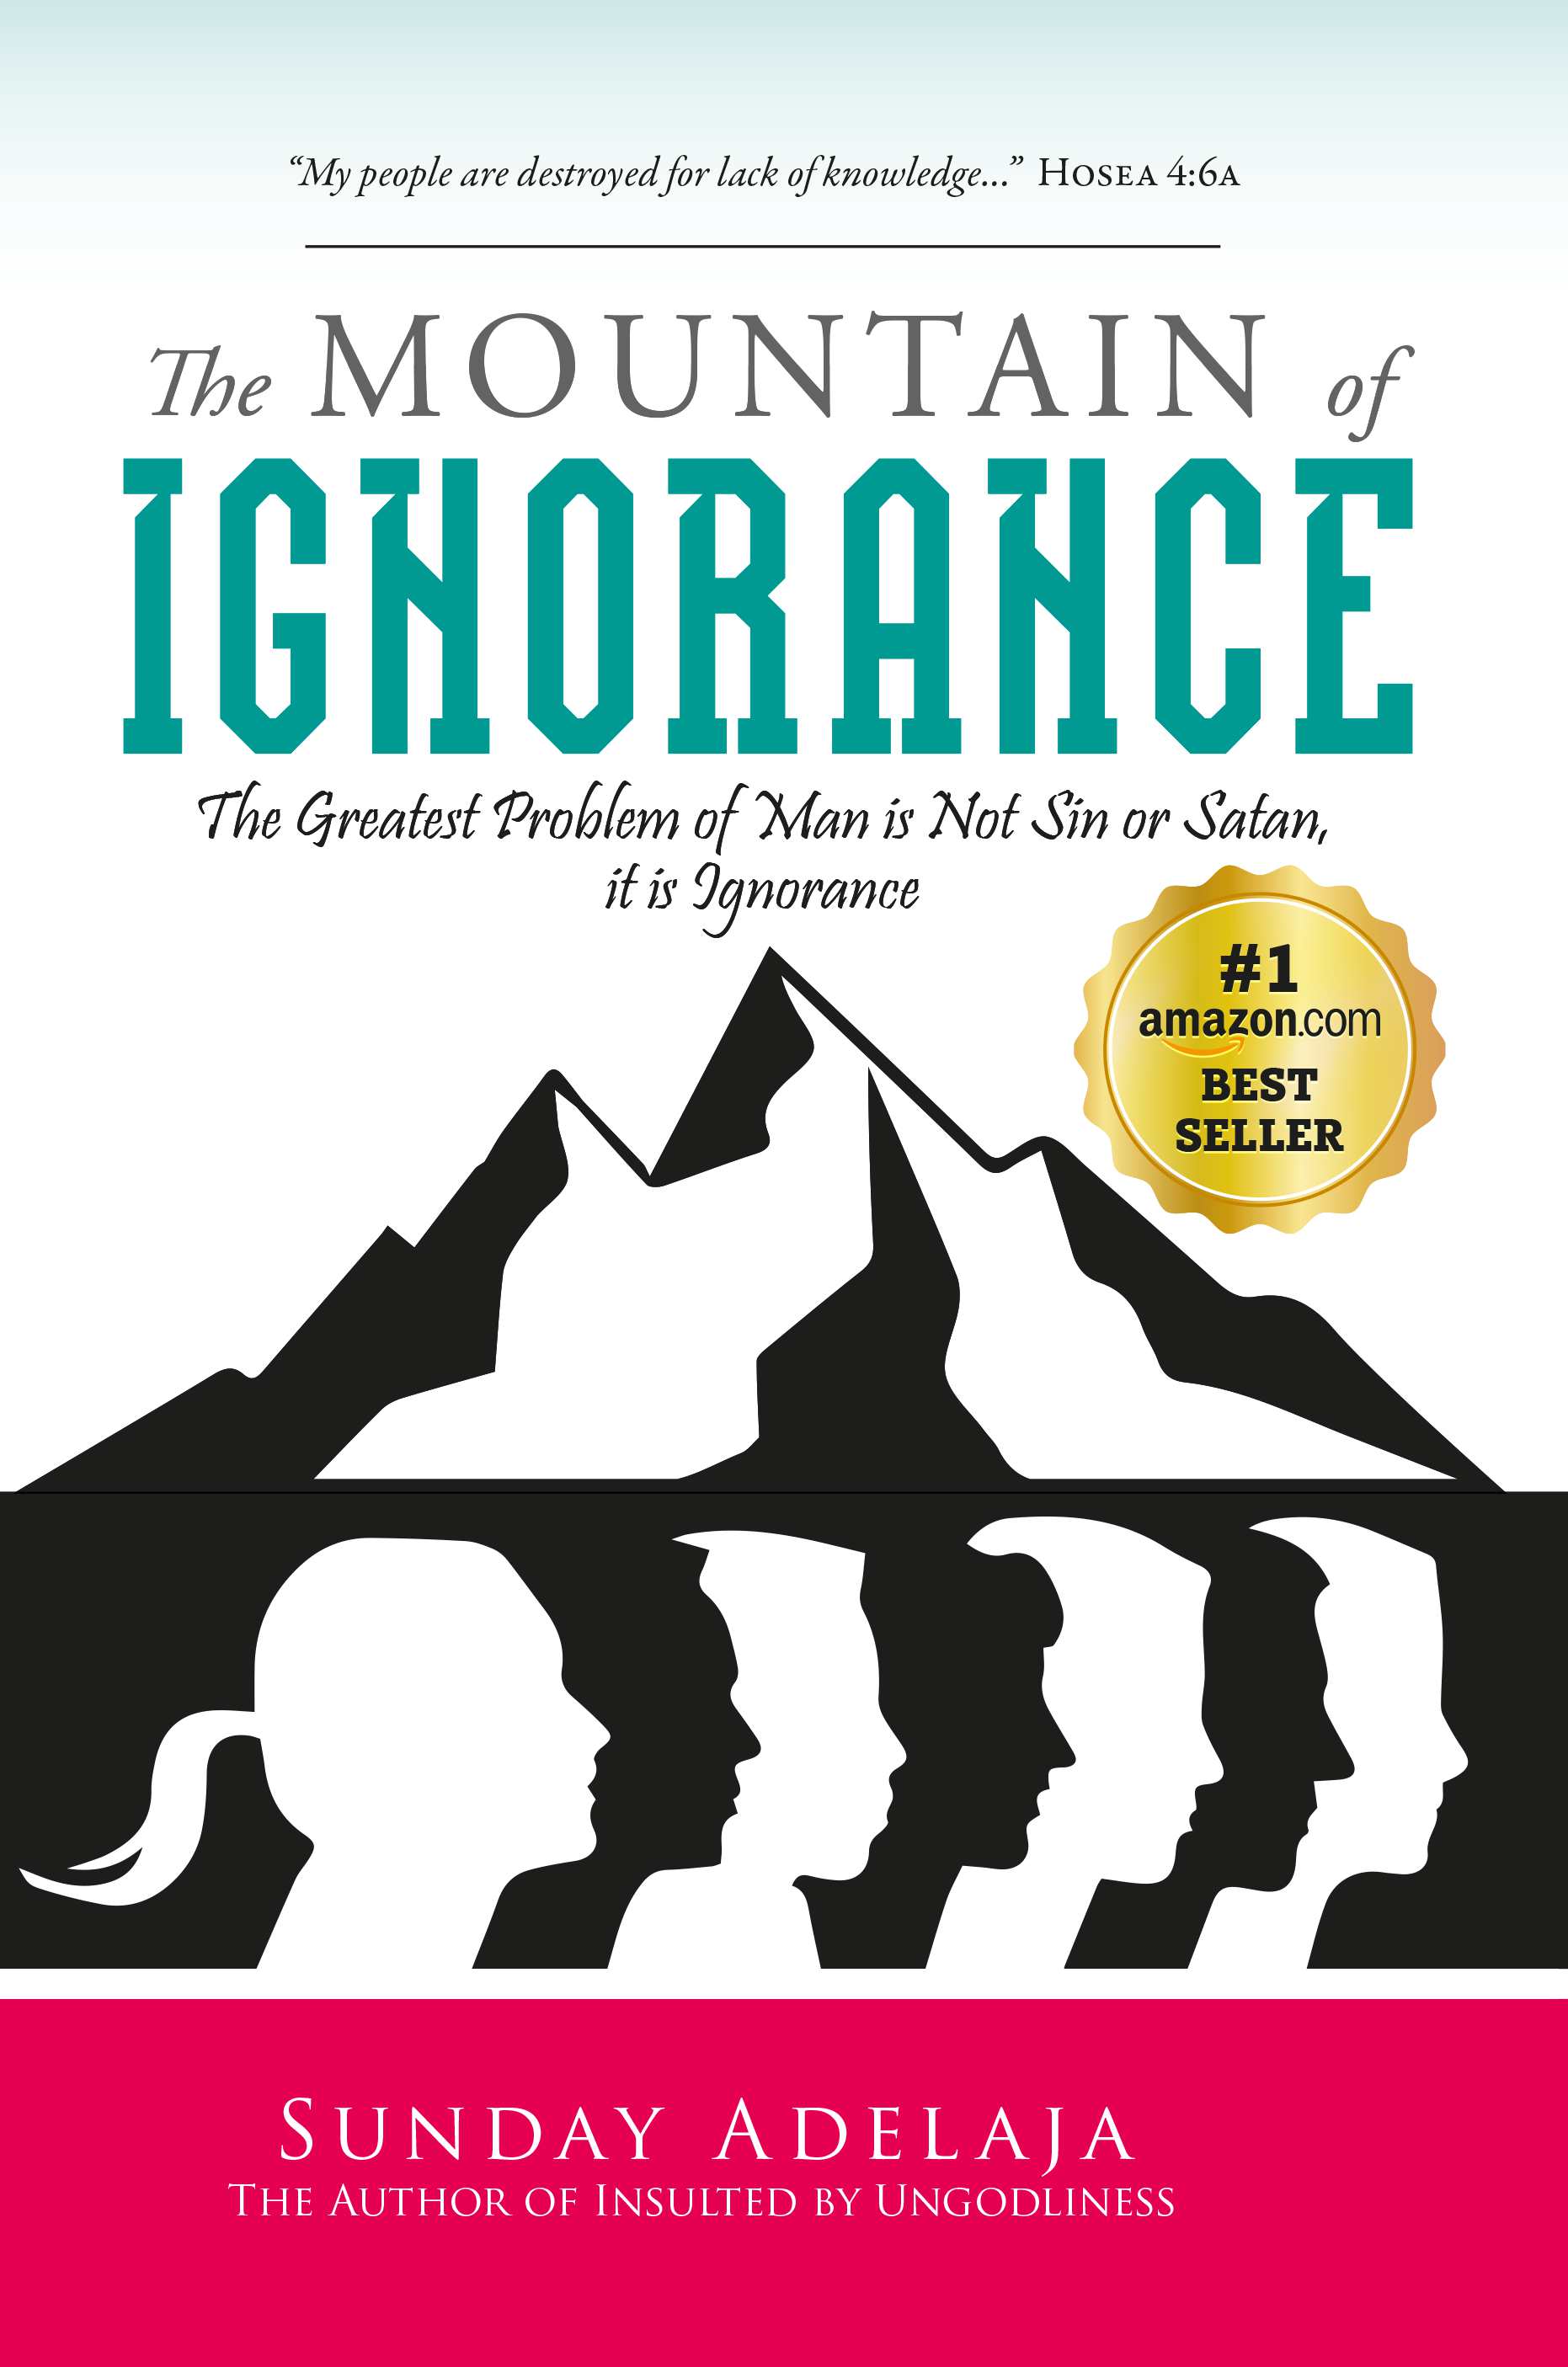 The-Mountain-of-Ignorance--The-Greatest-Problem-of-Man-is-Not-Sin-or-Satan--it-is-Ignorance